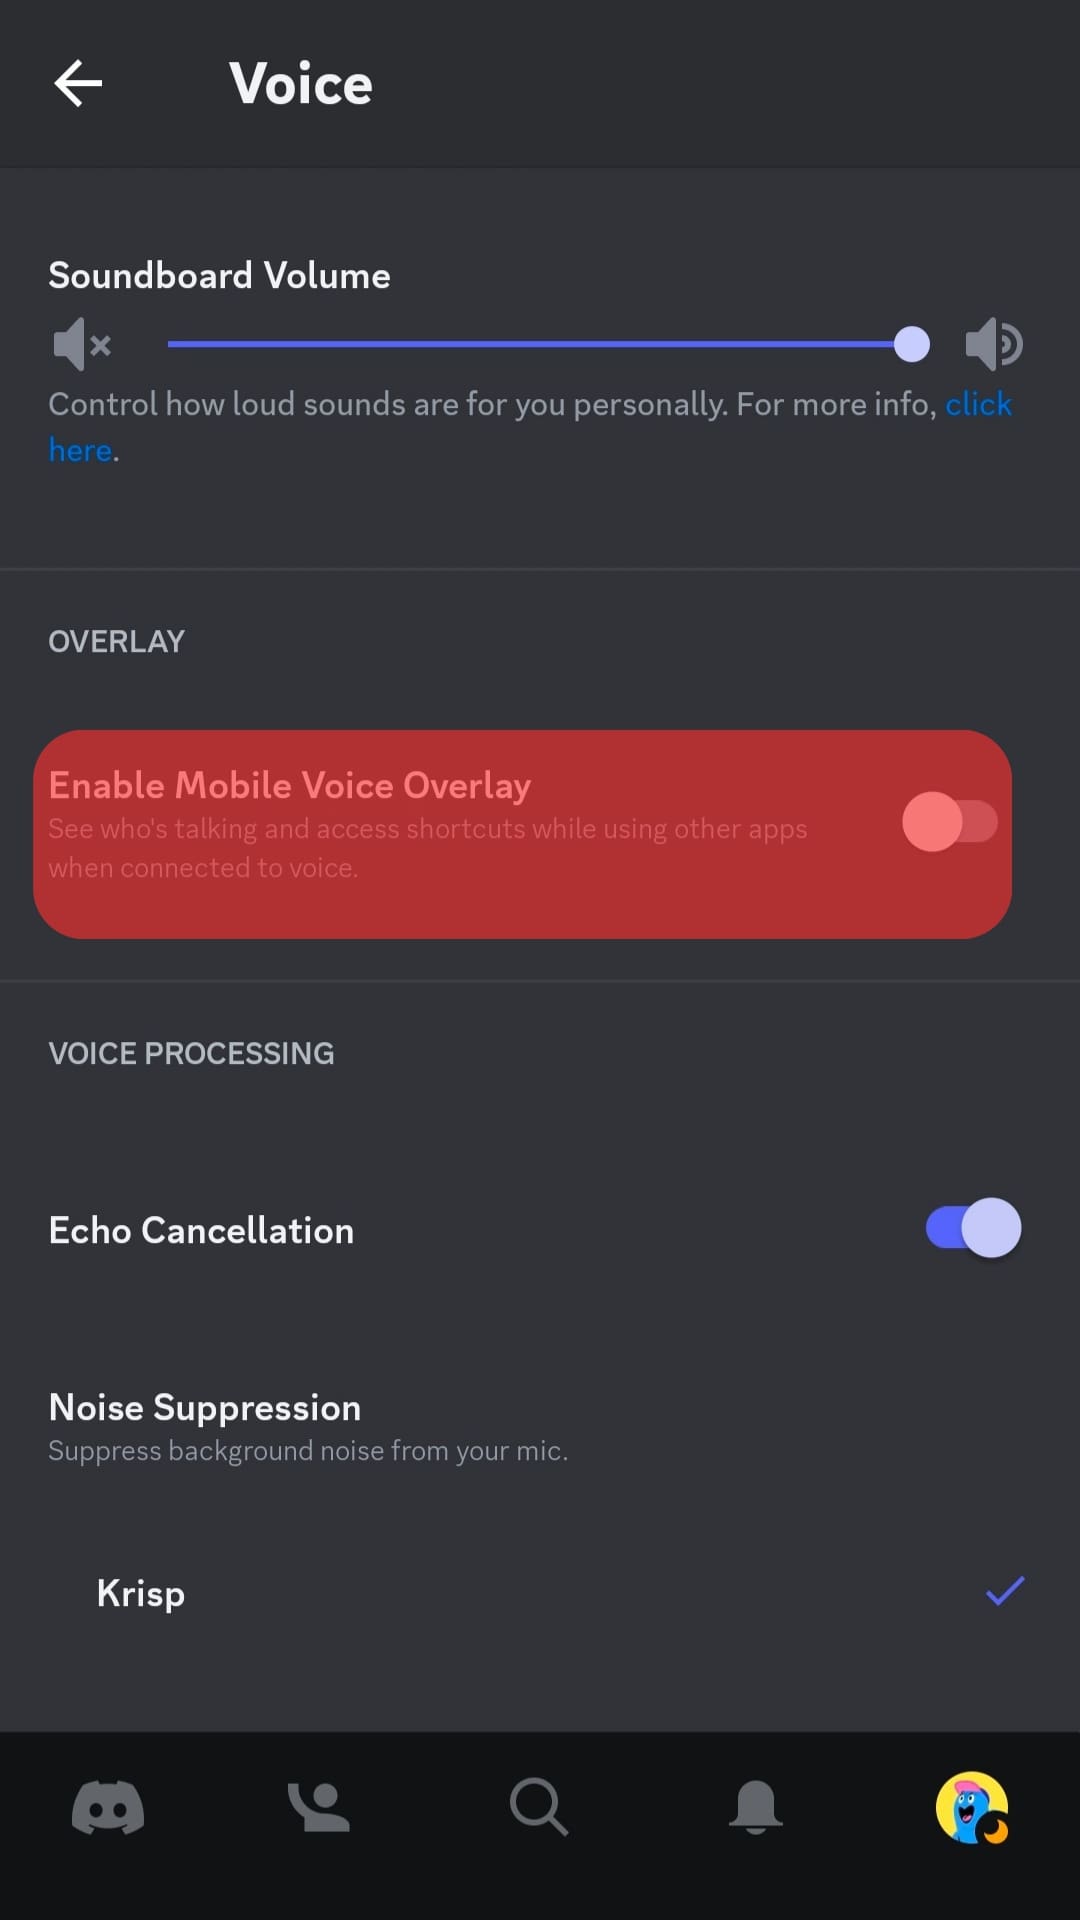 Toggle The Switch For Enable Mobile Voice Overlay.